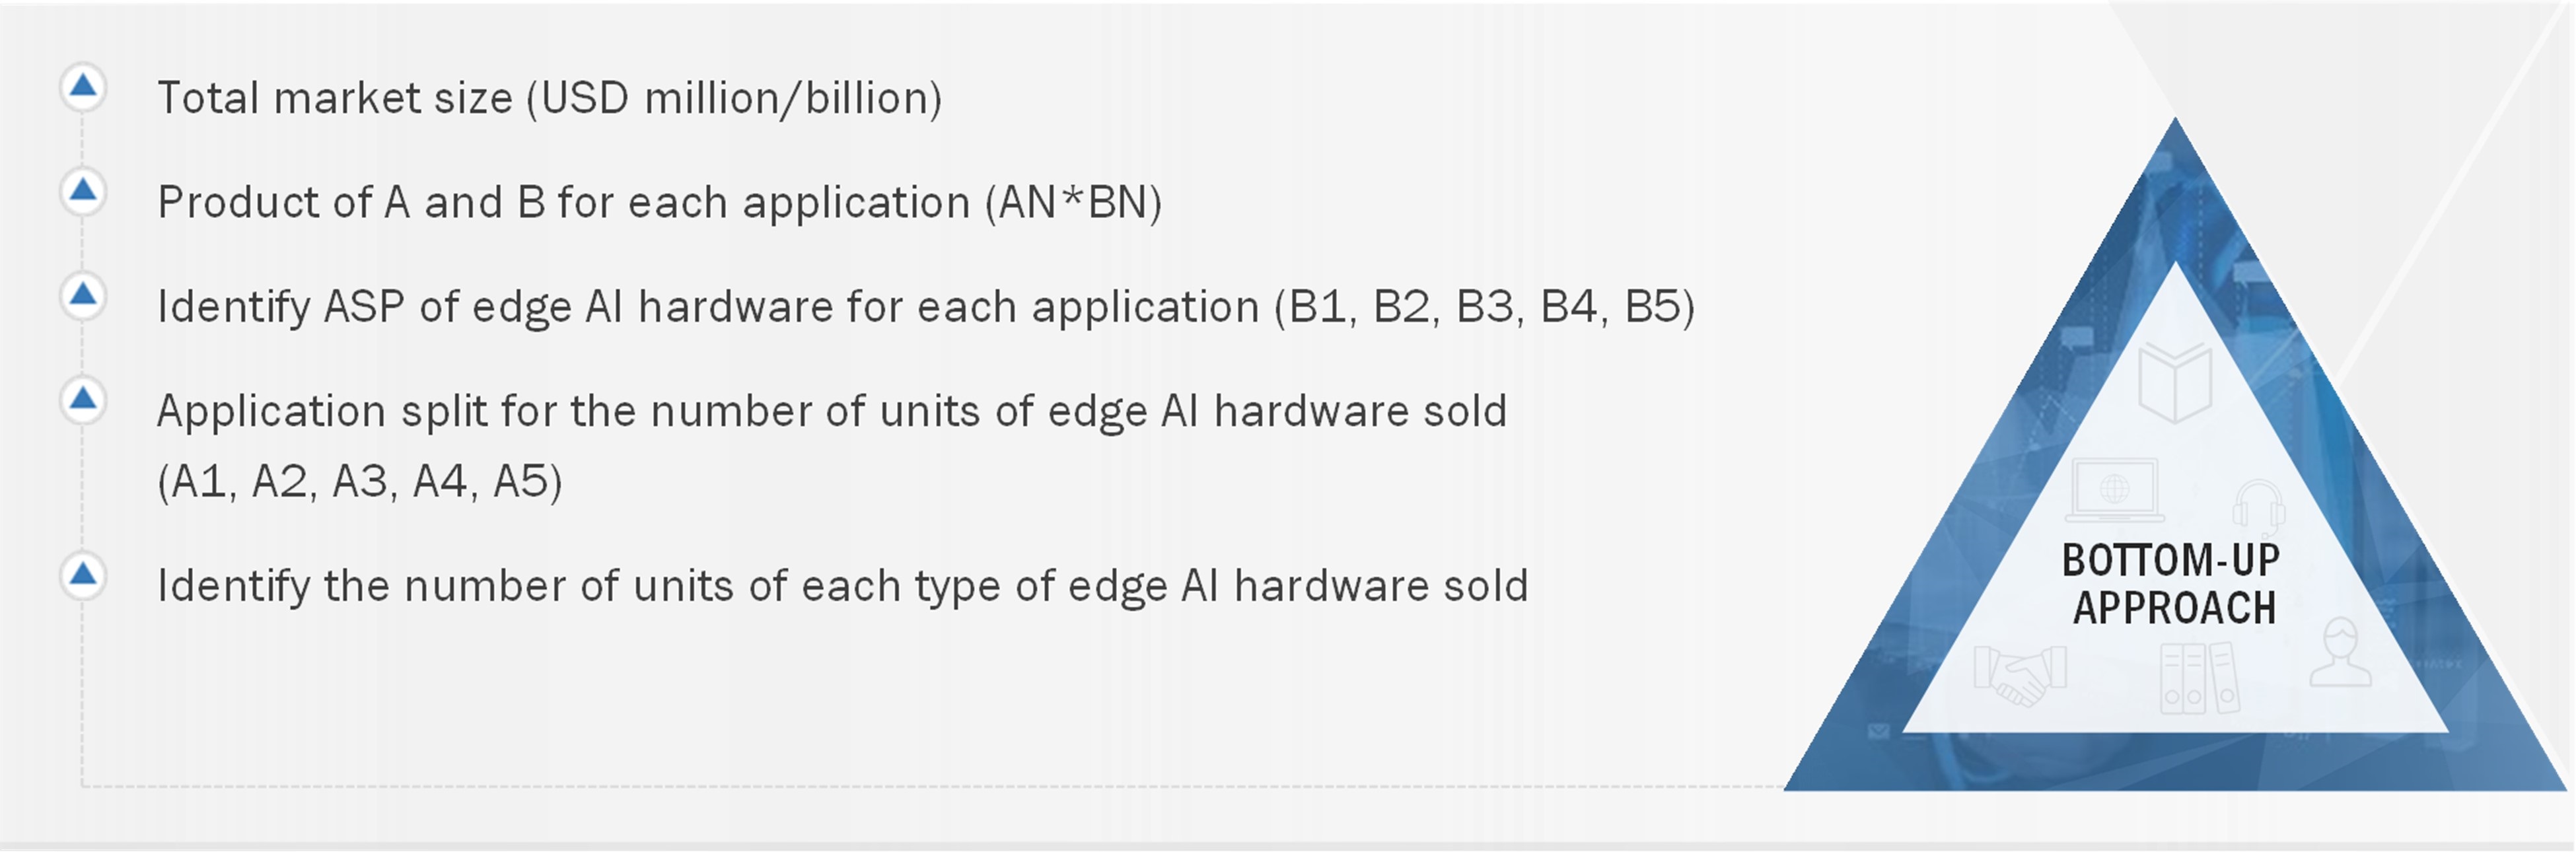 Edge AI Hardware Market Size, and Bottom-Up Approach 